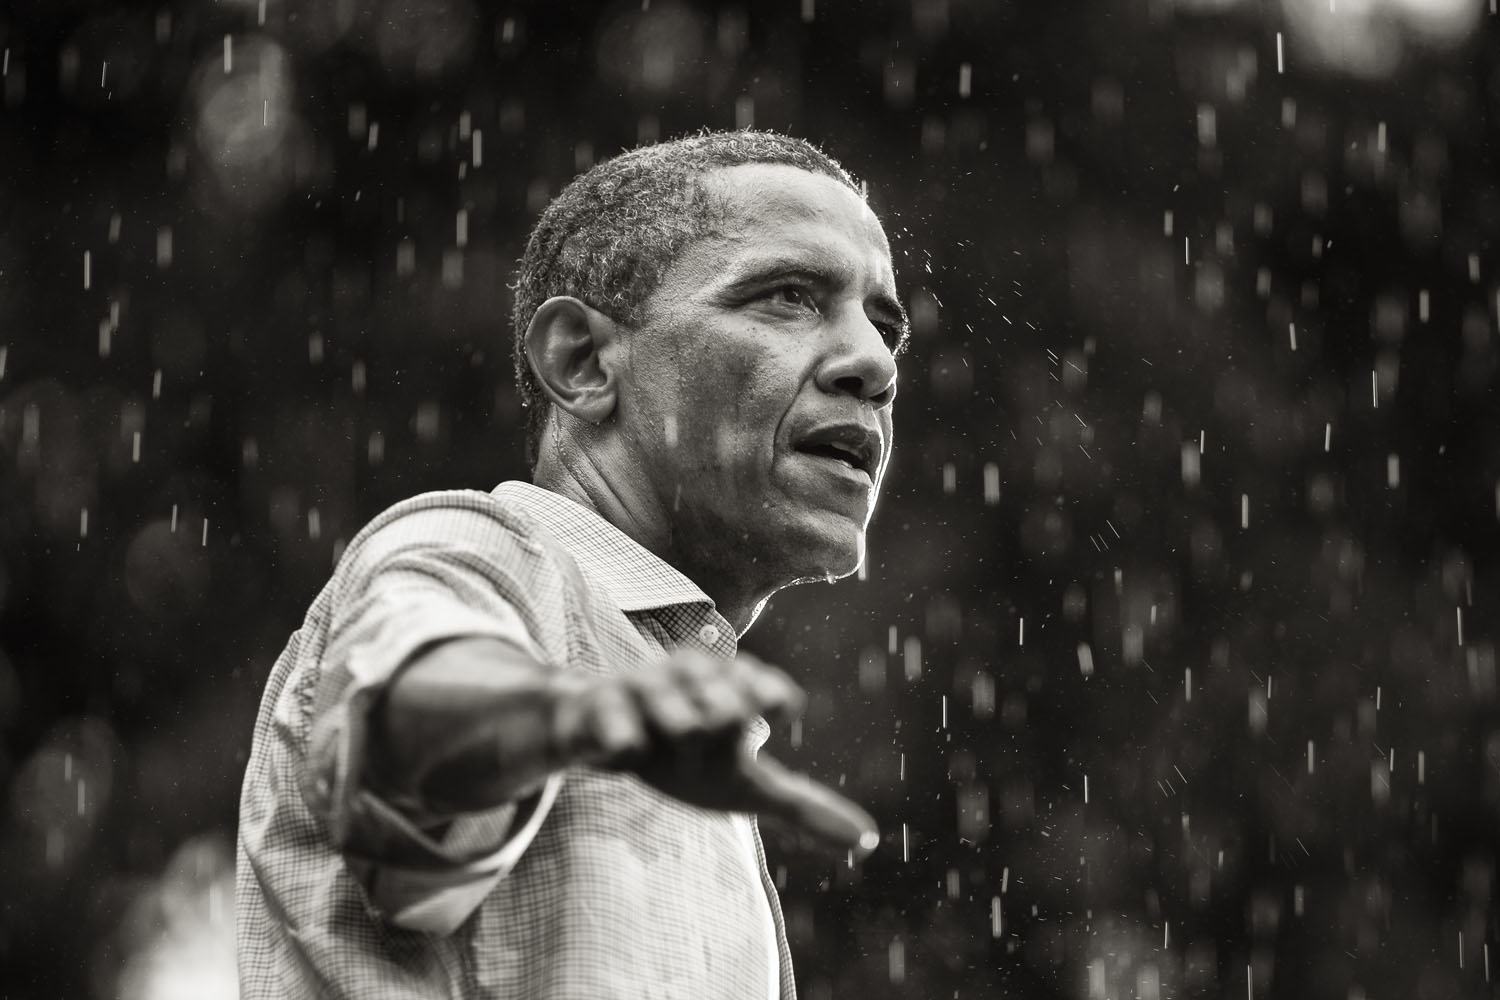 Photojournalist Brooks Kraft followed Barack Obama during his last campaign producing an intimate look at the President fighting for re-election. Brooks Kraft covered President Obama extensively for TIME throughout the campaign.